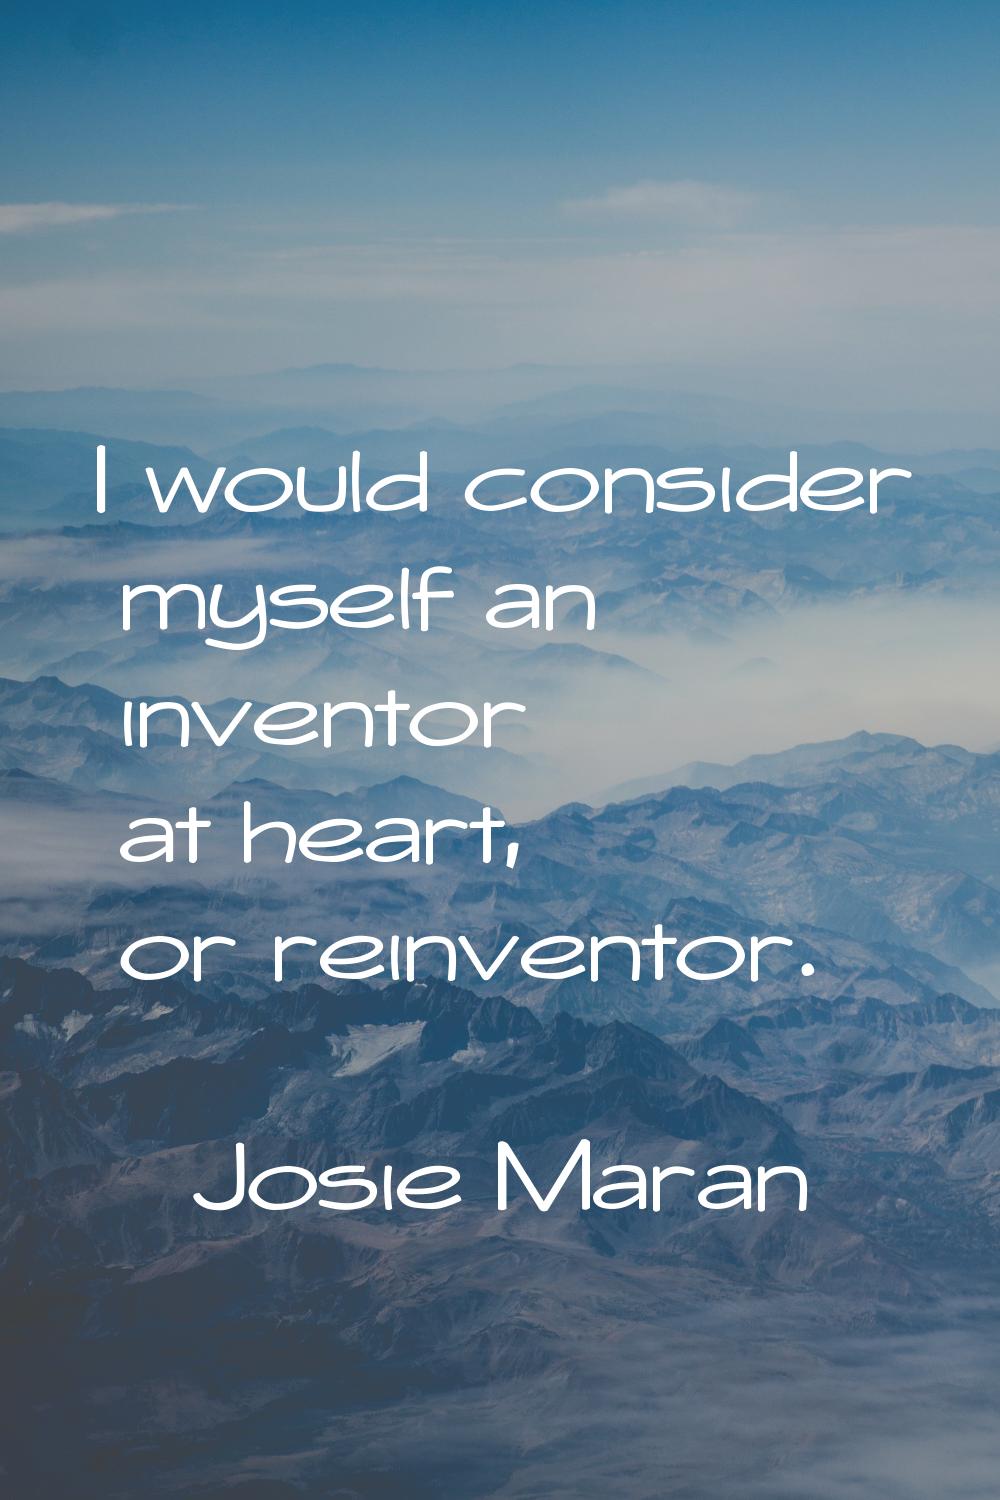 I would consider myself an inventor at heart, or reinventor.